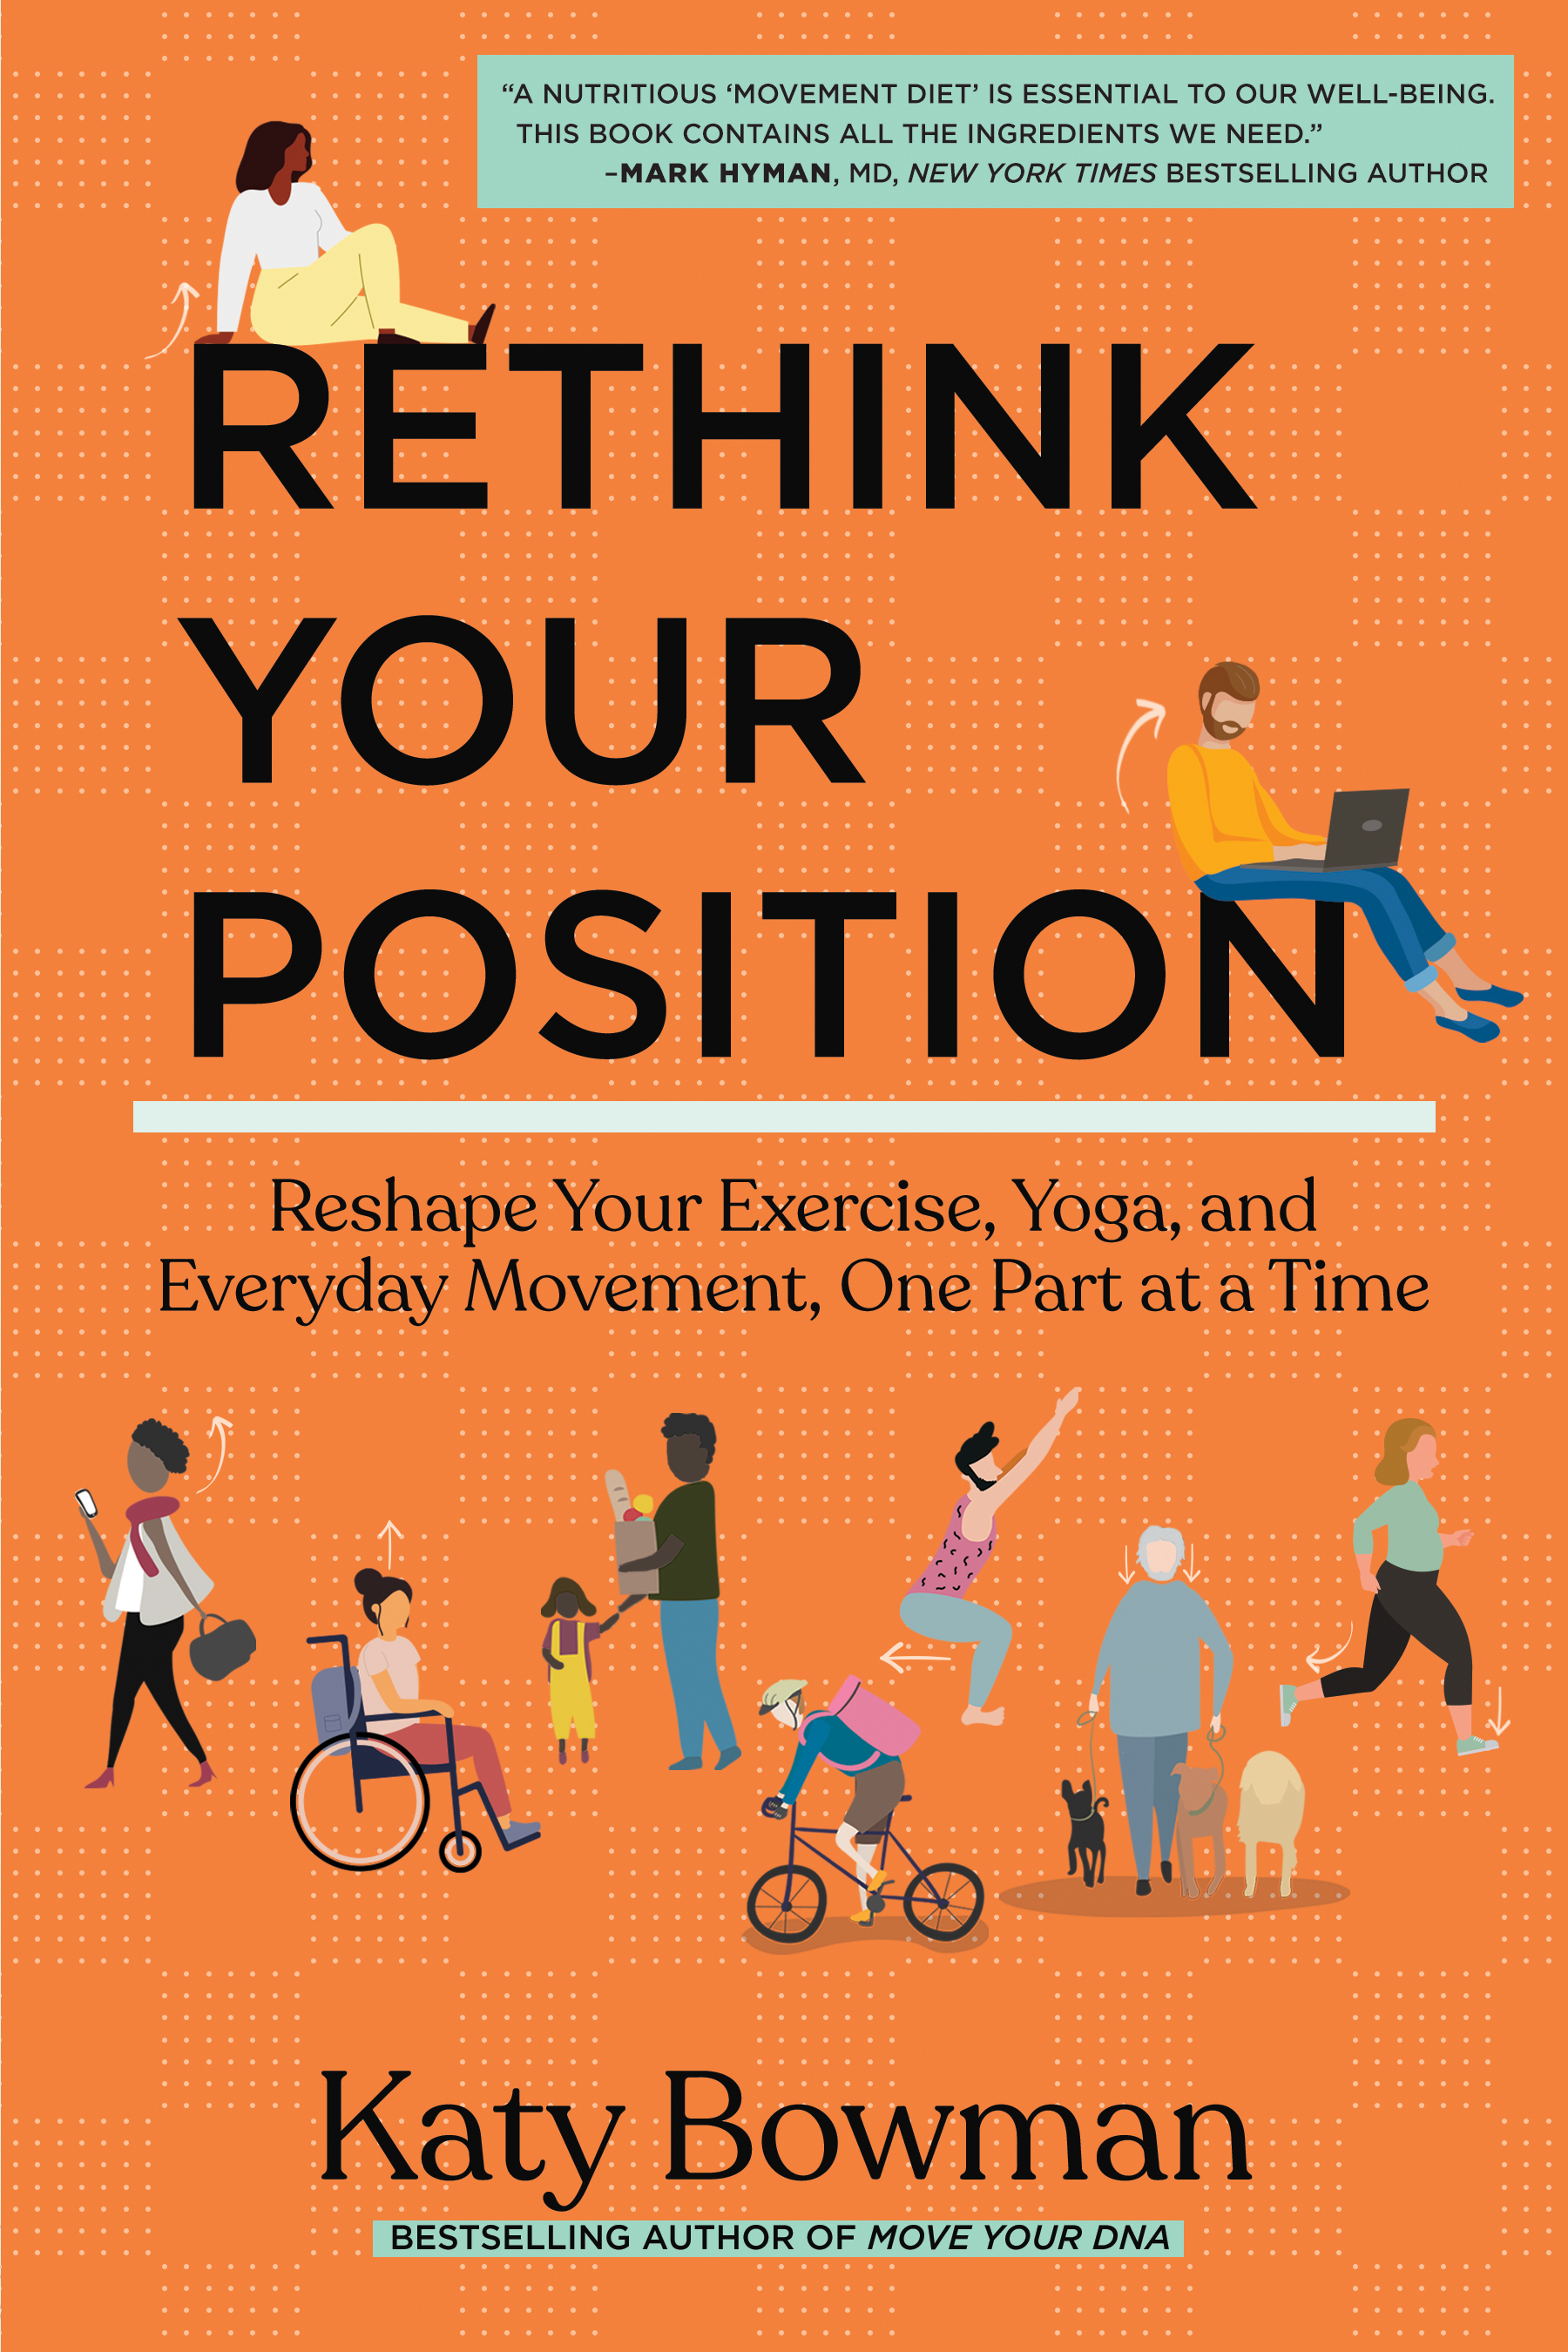 Rethink your position by Katy Bowman